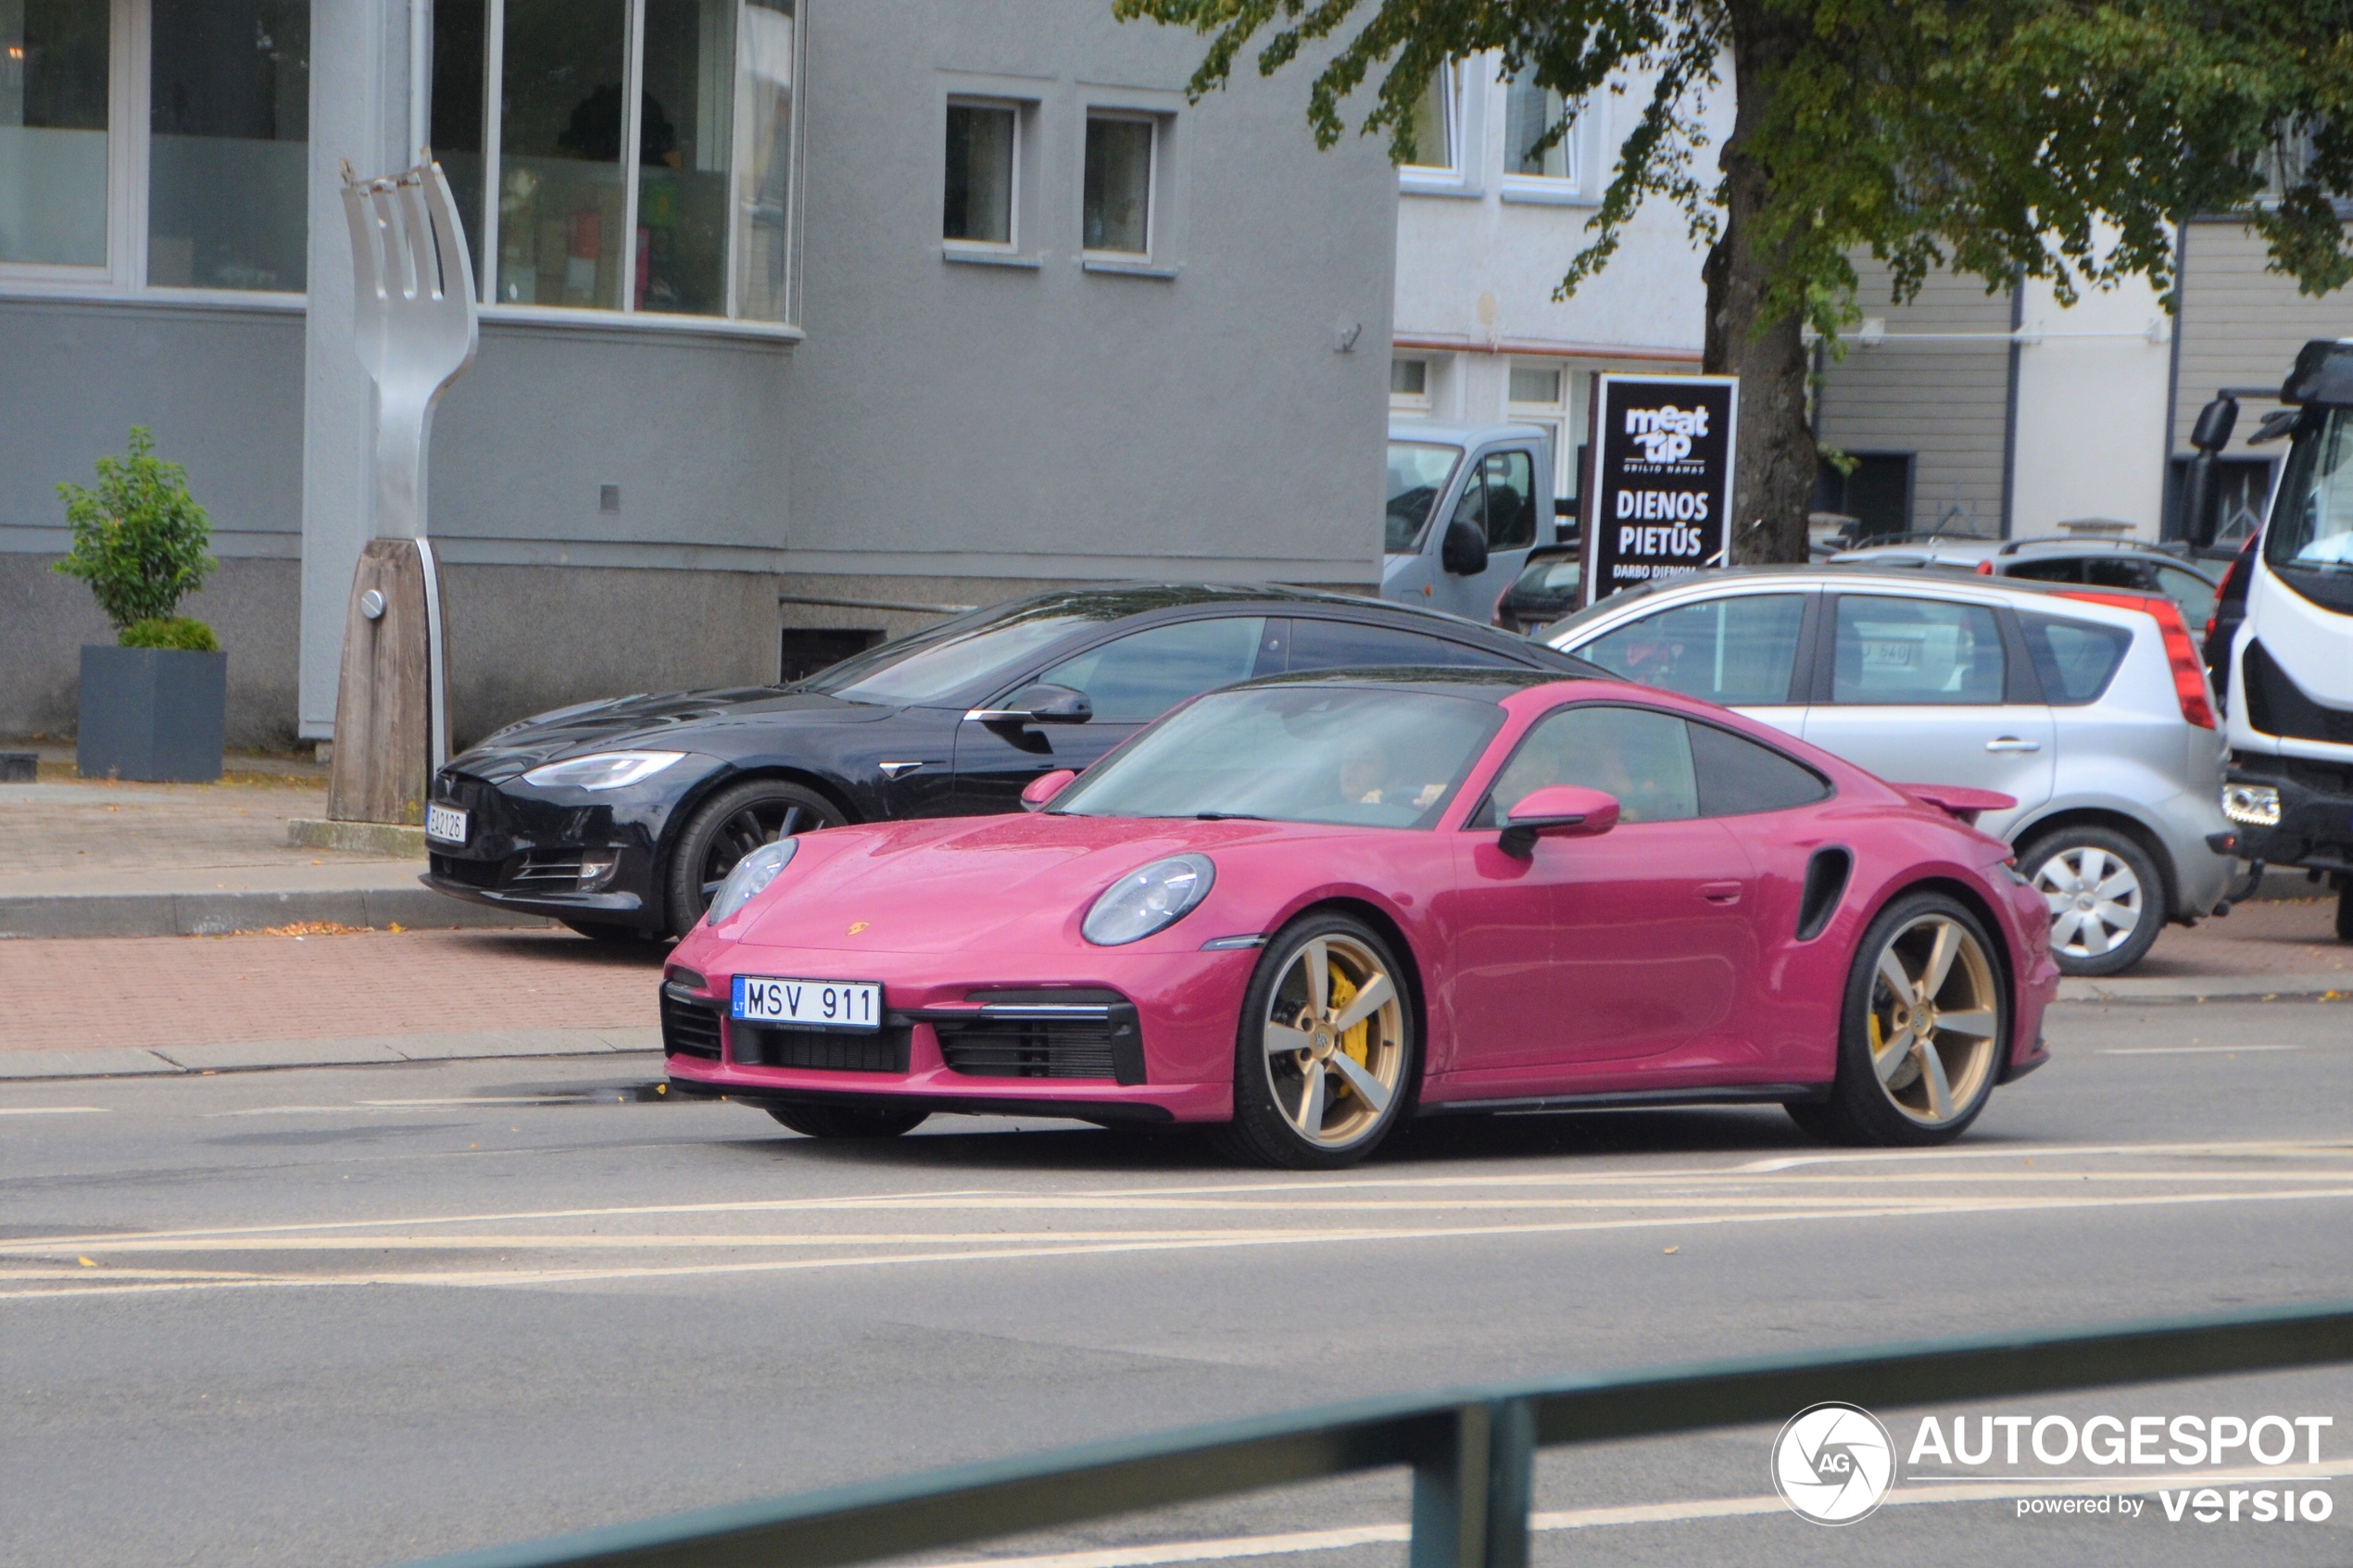 A very uniqe 992 Turbo S shows up in Palanga